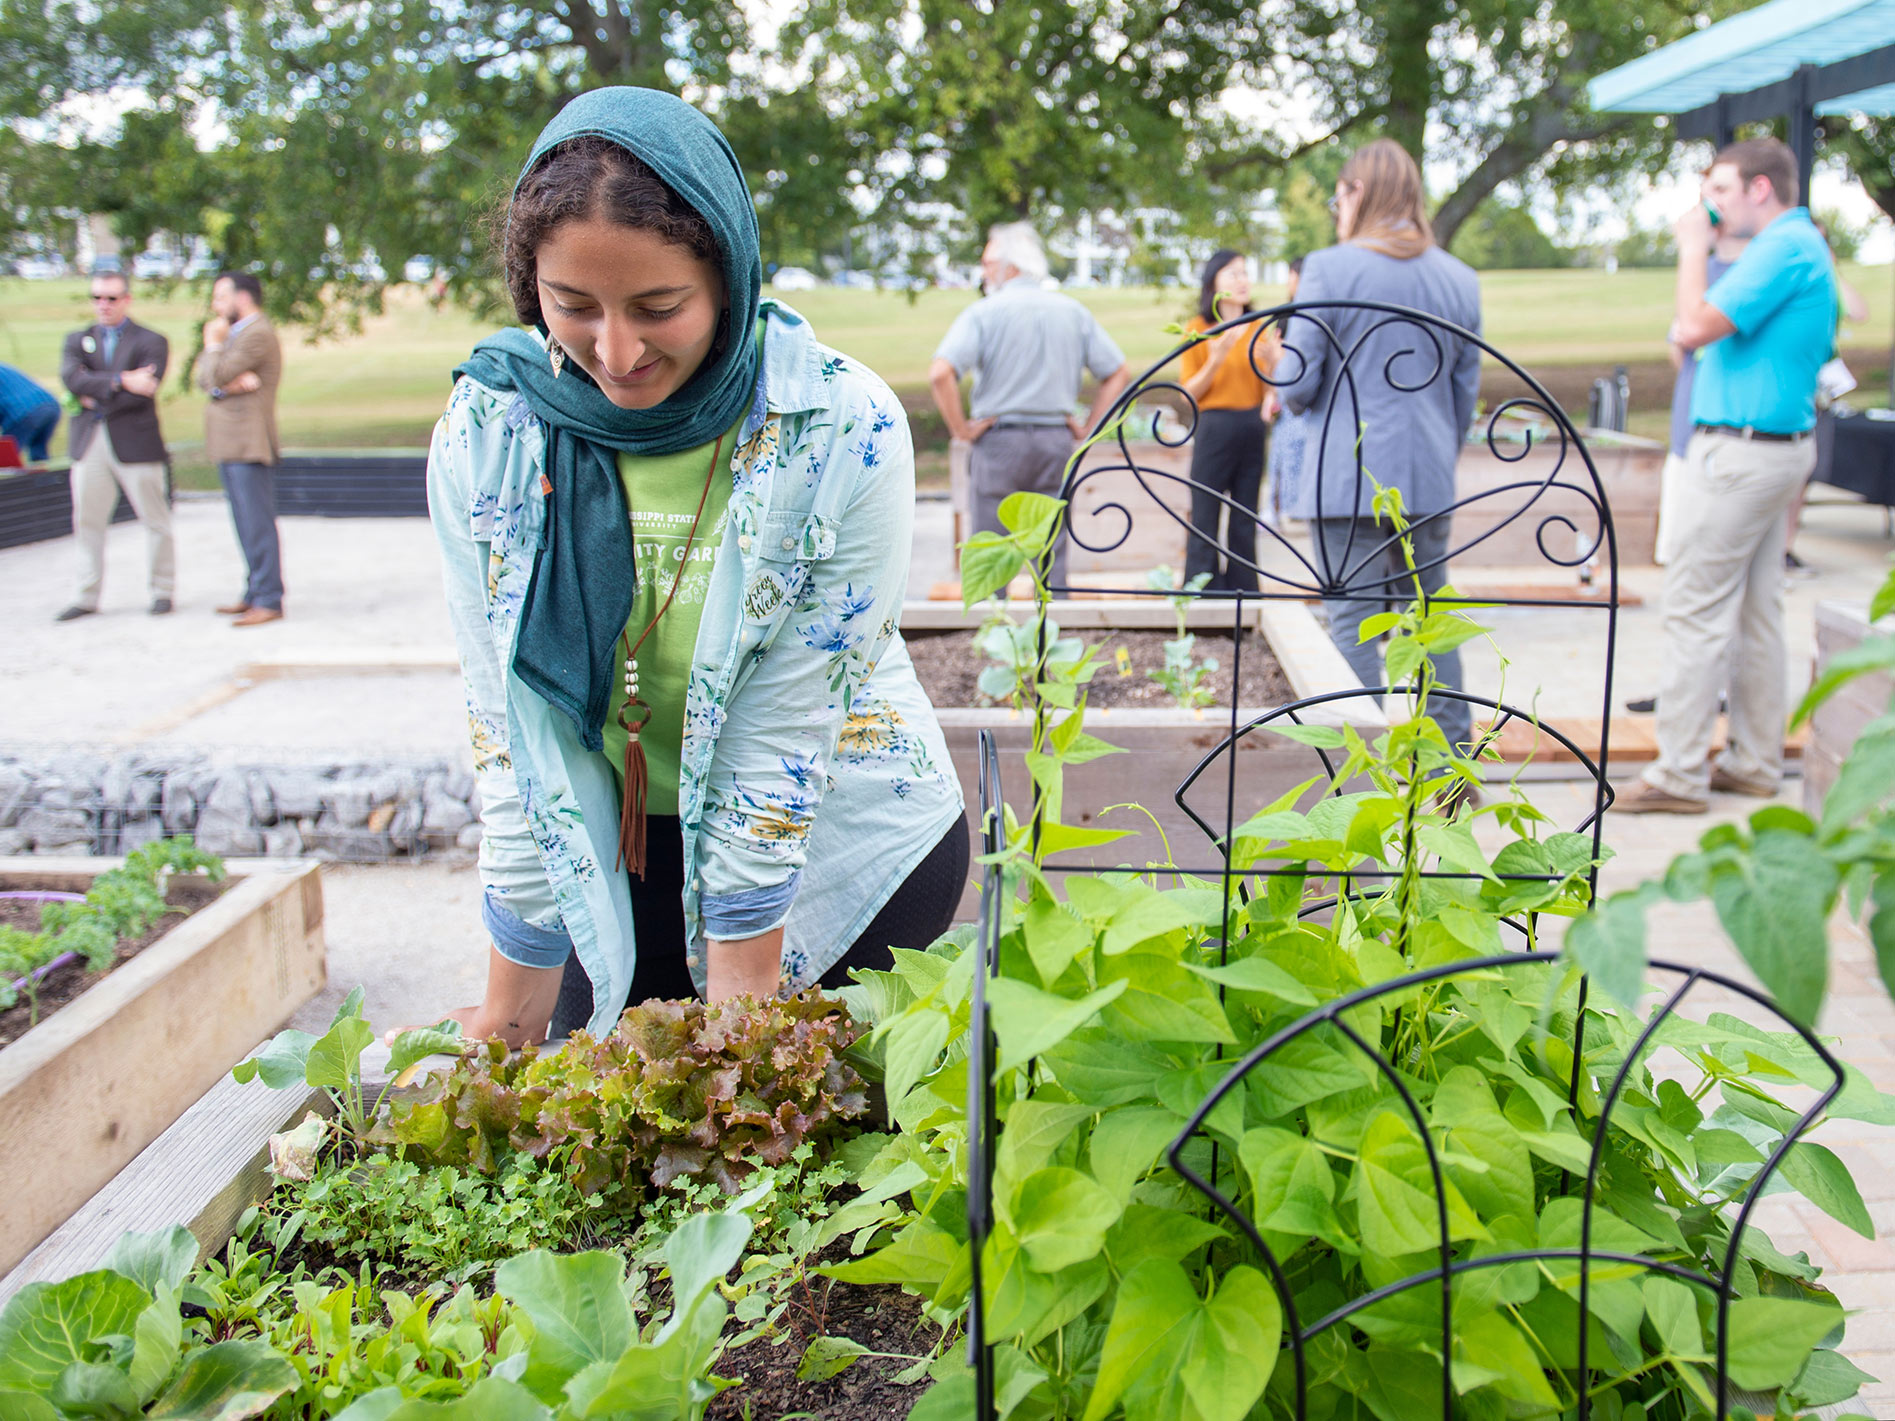 A woman with a teal scarf wrapped around her head leans toward a gardening box filled with bright green, leafy plants. Several other people stand conversing in the background.